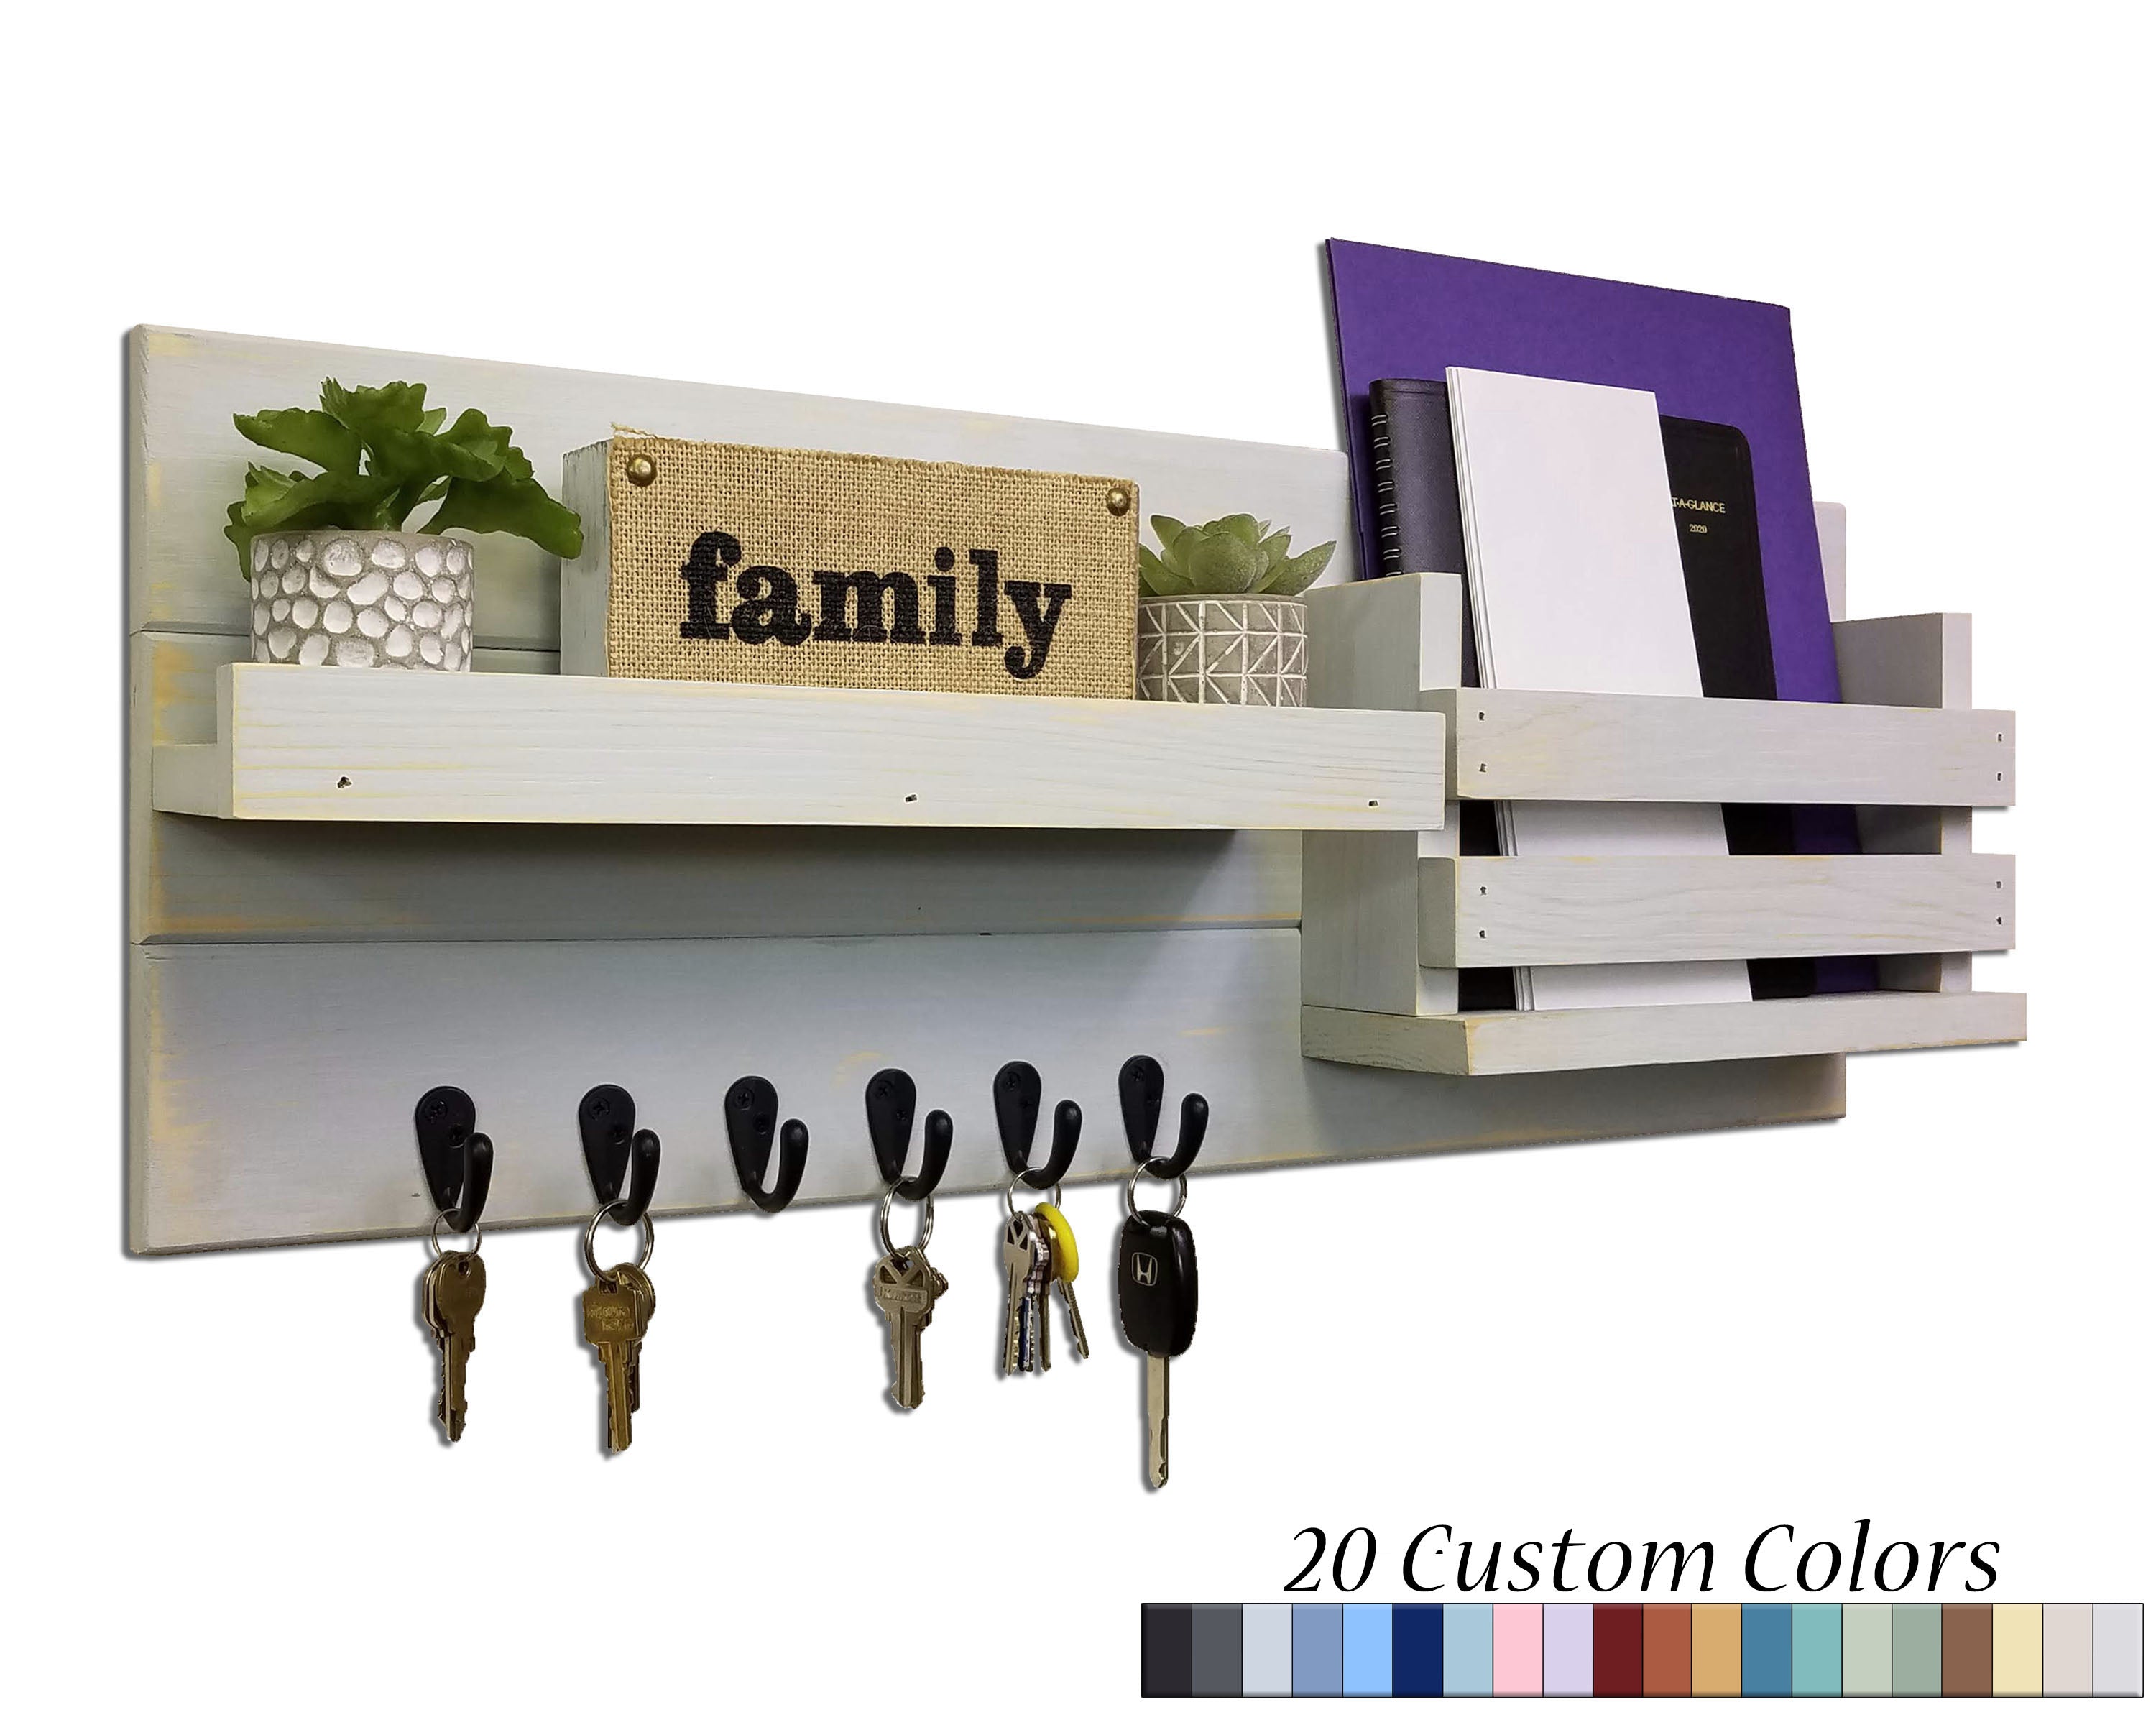 Greatland Wall Mounted Organizer, 20 Colors & 5 Hook Finishes by Renewed Decor